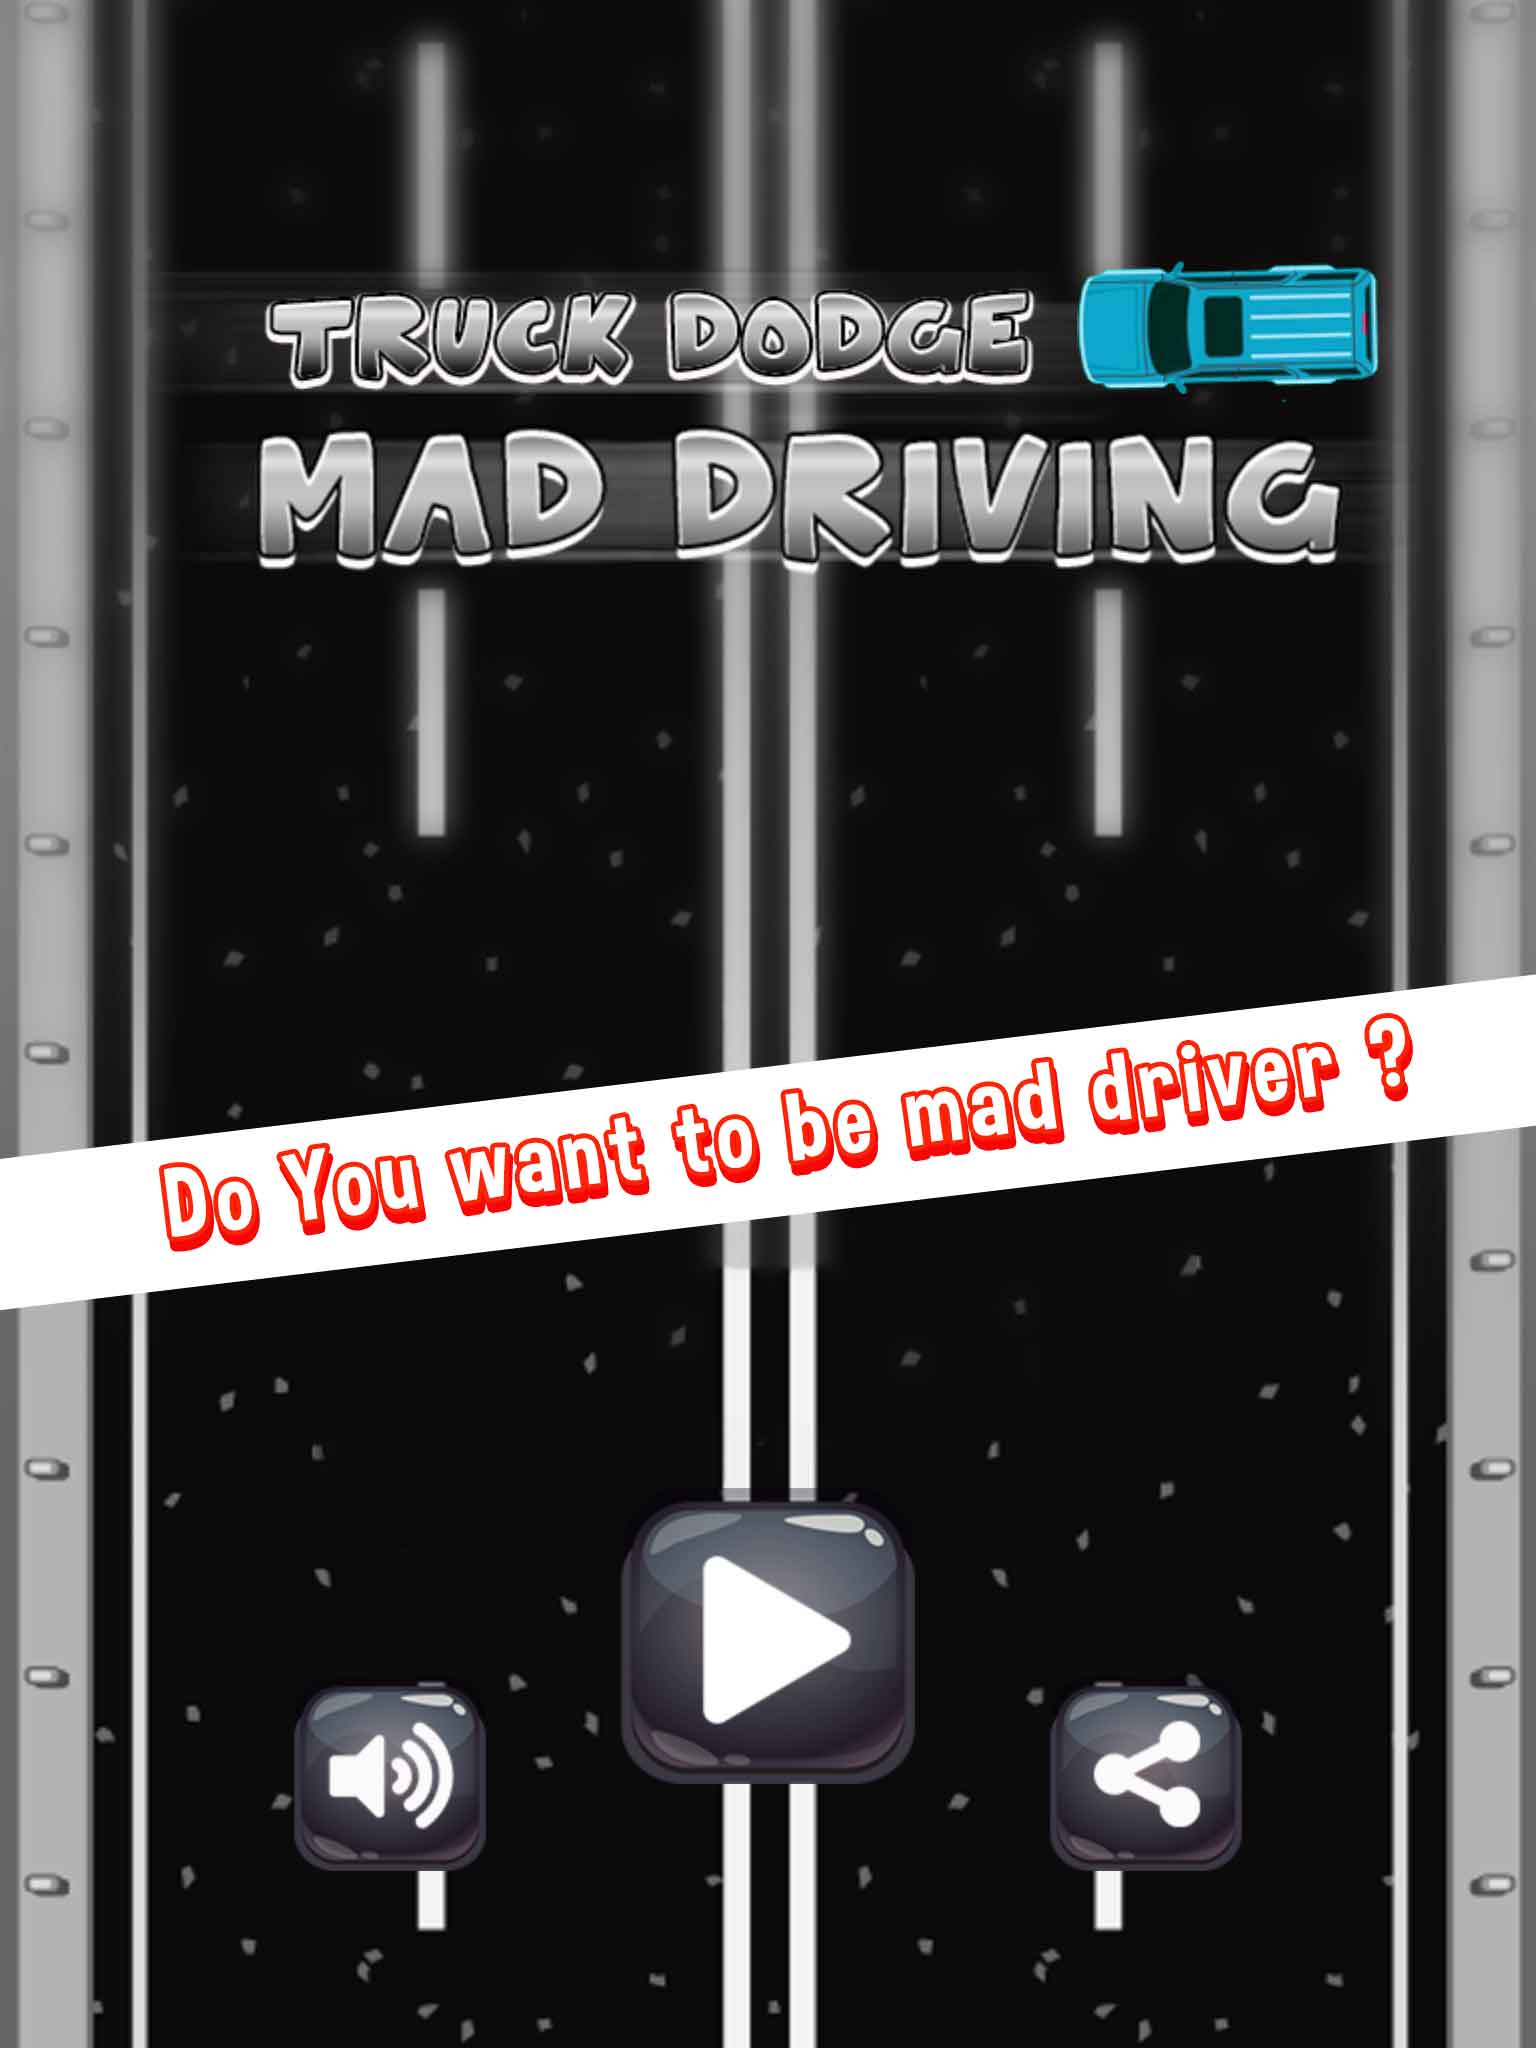 Truck Dodge Mad Driving